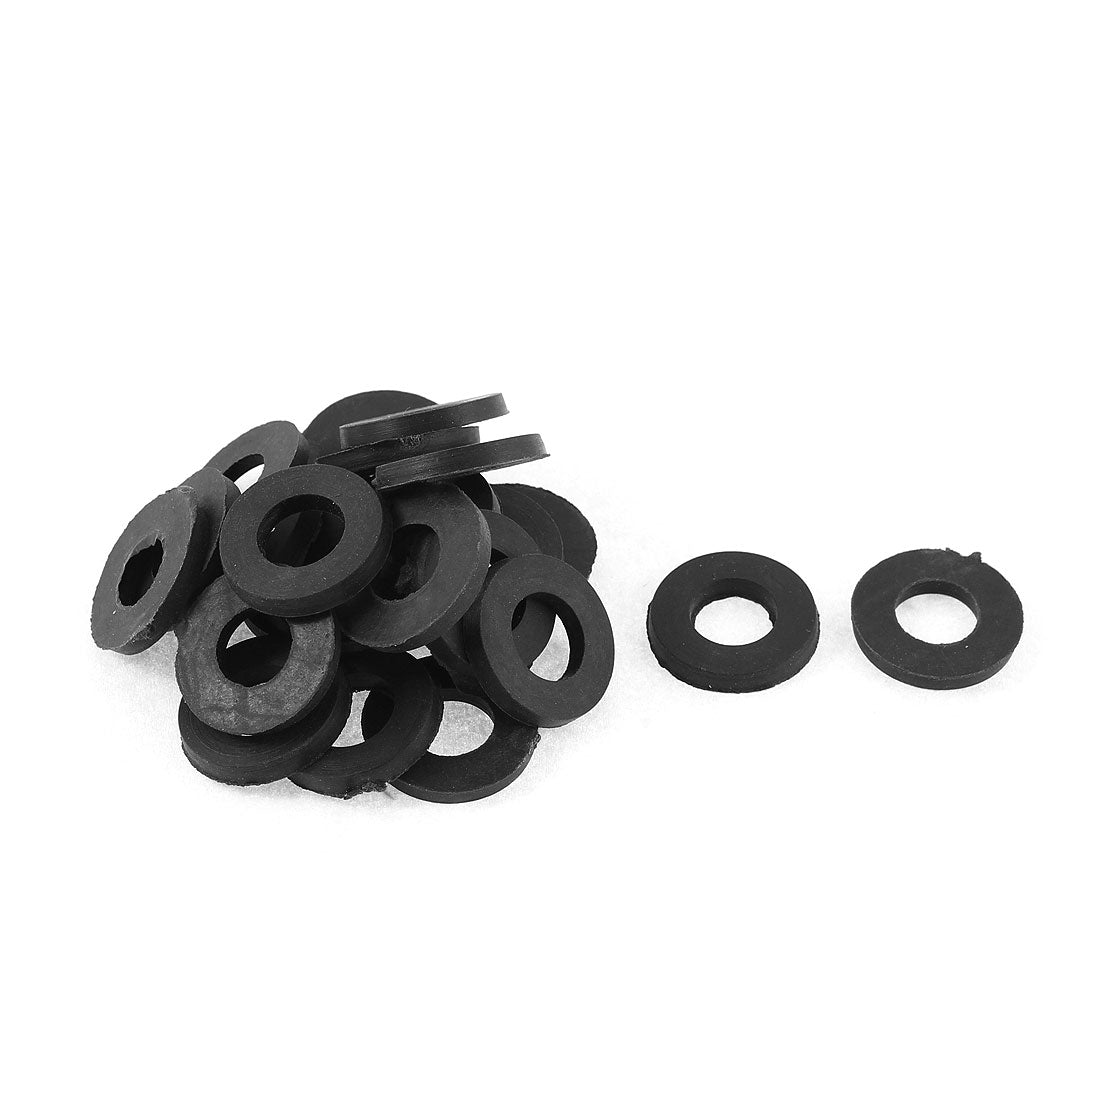 uxcell Uxcell 25 Pcs Rubber Round Shaped Flat Spacer Washer Gasket Seal Ring M10x20mmx3mm